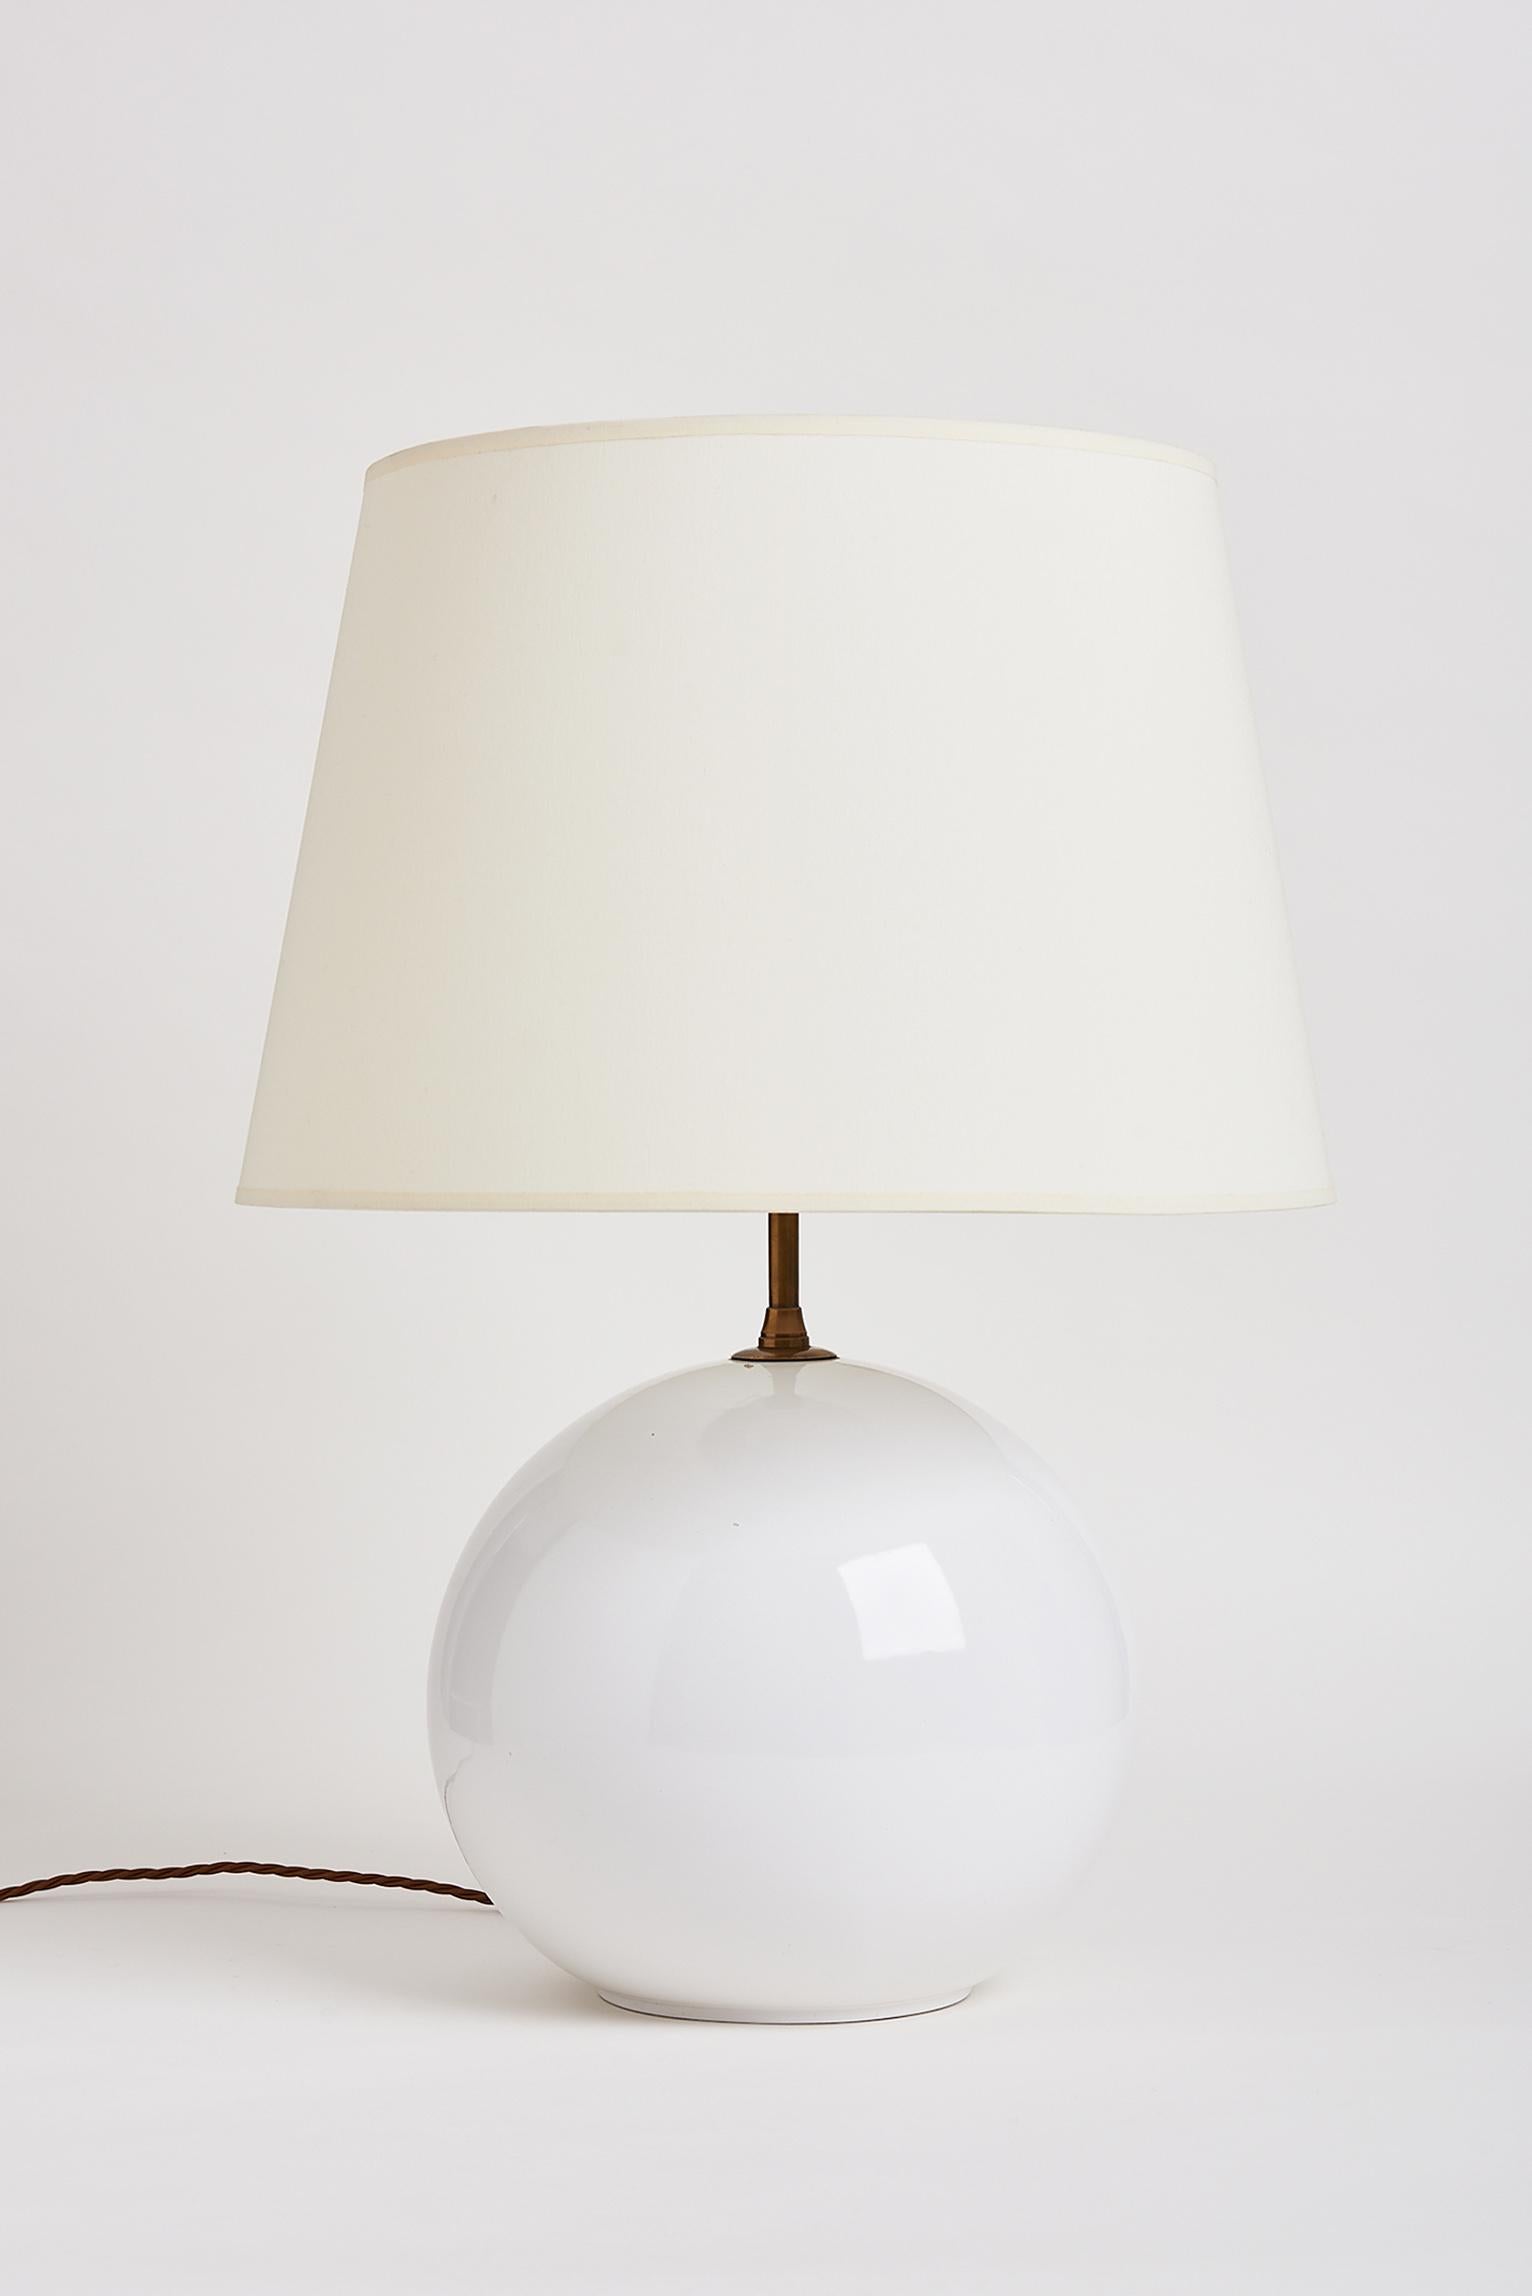 A large white ceramic spherical table lamp.
France, third quarter of the 20th century.
Measures: With the shade: 66 cm high by 46 cm diameter.
Lamp base only: 41 cm high by 31 cm diameter.